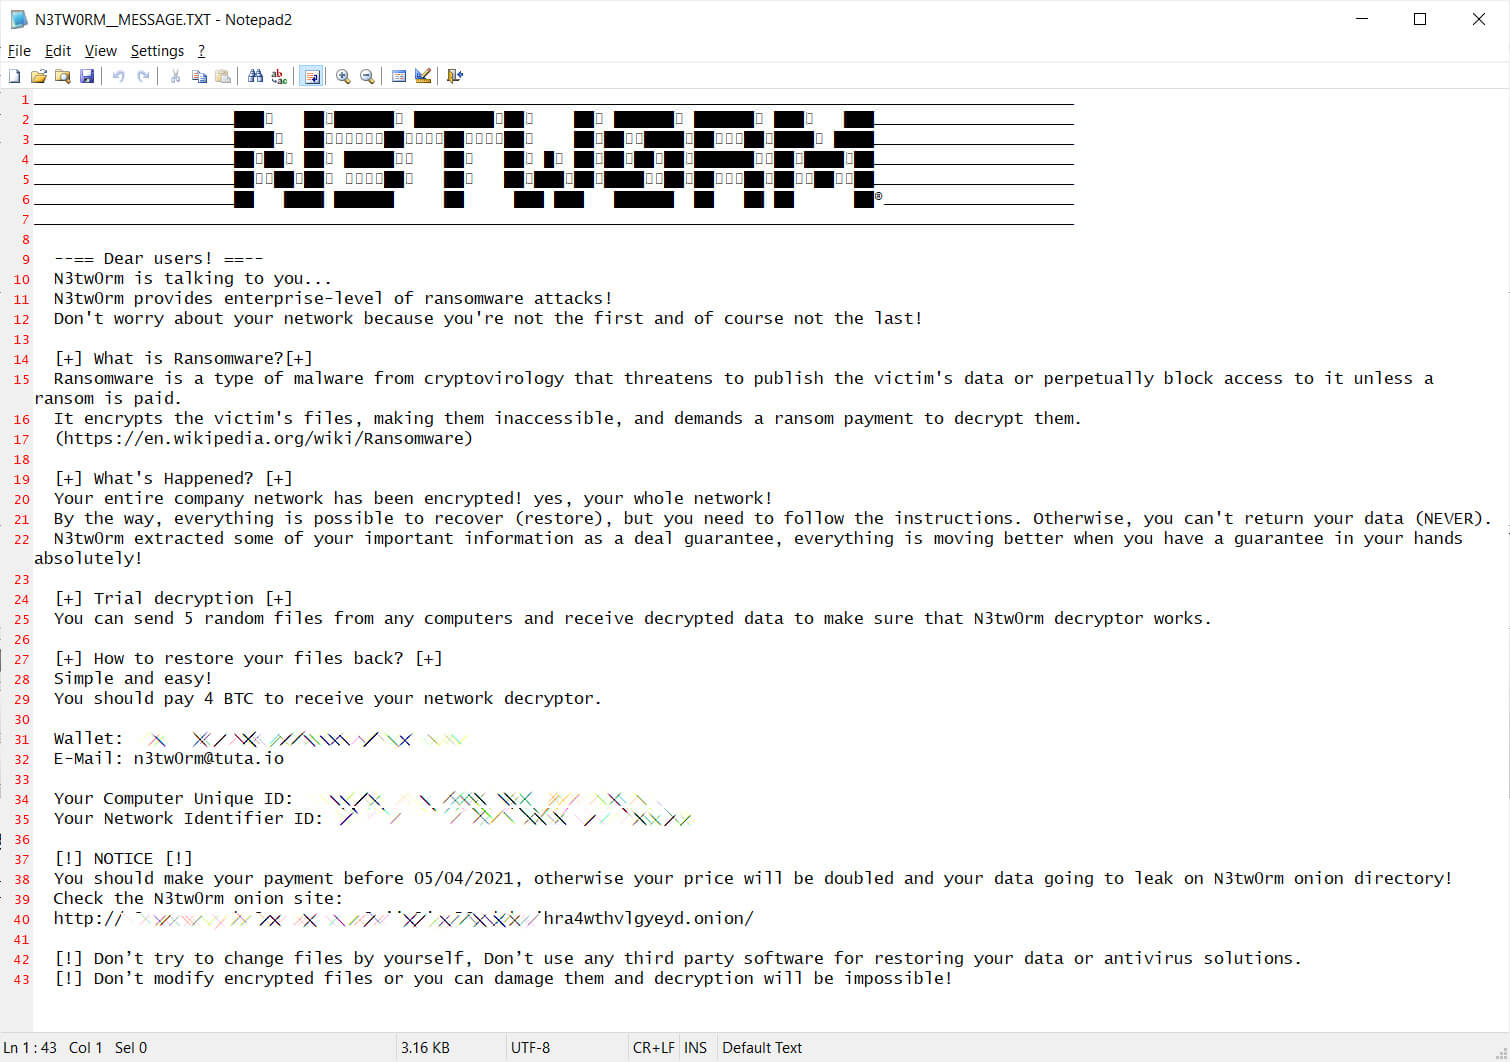 N3TW0RM ransom note